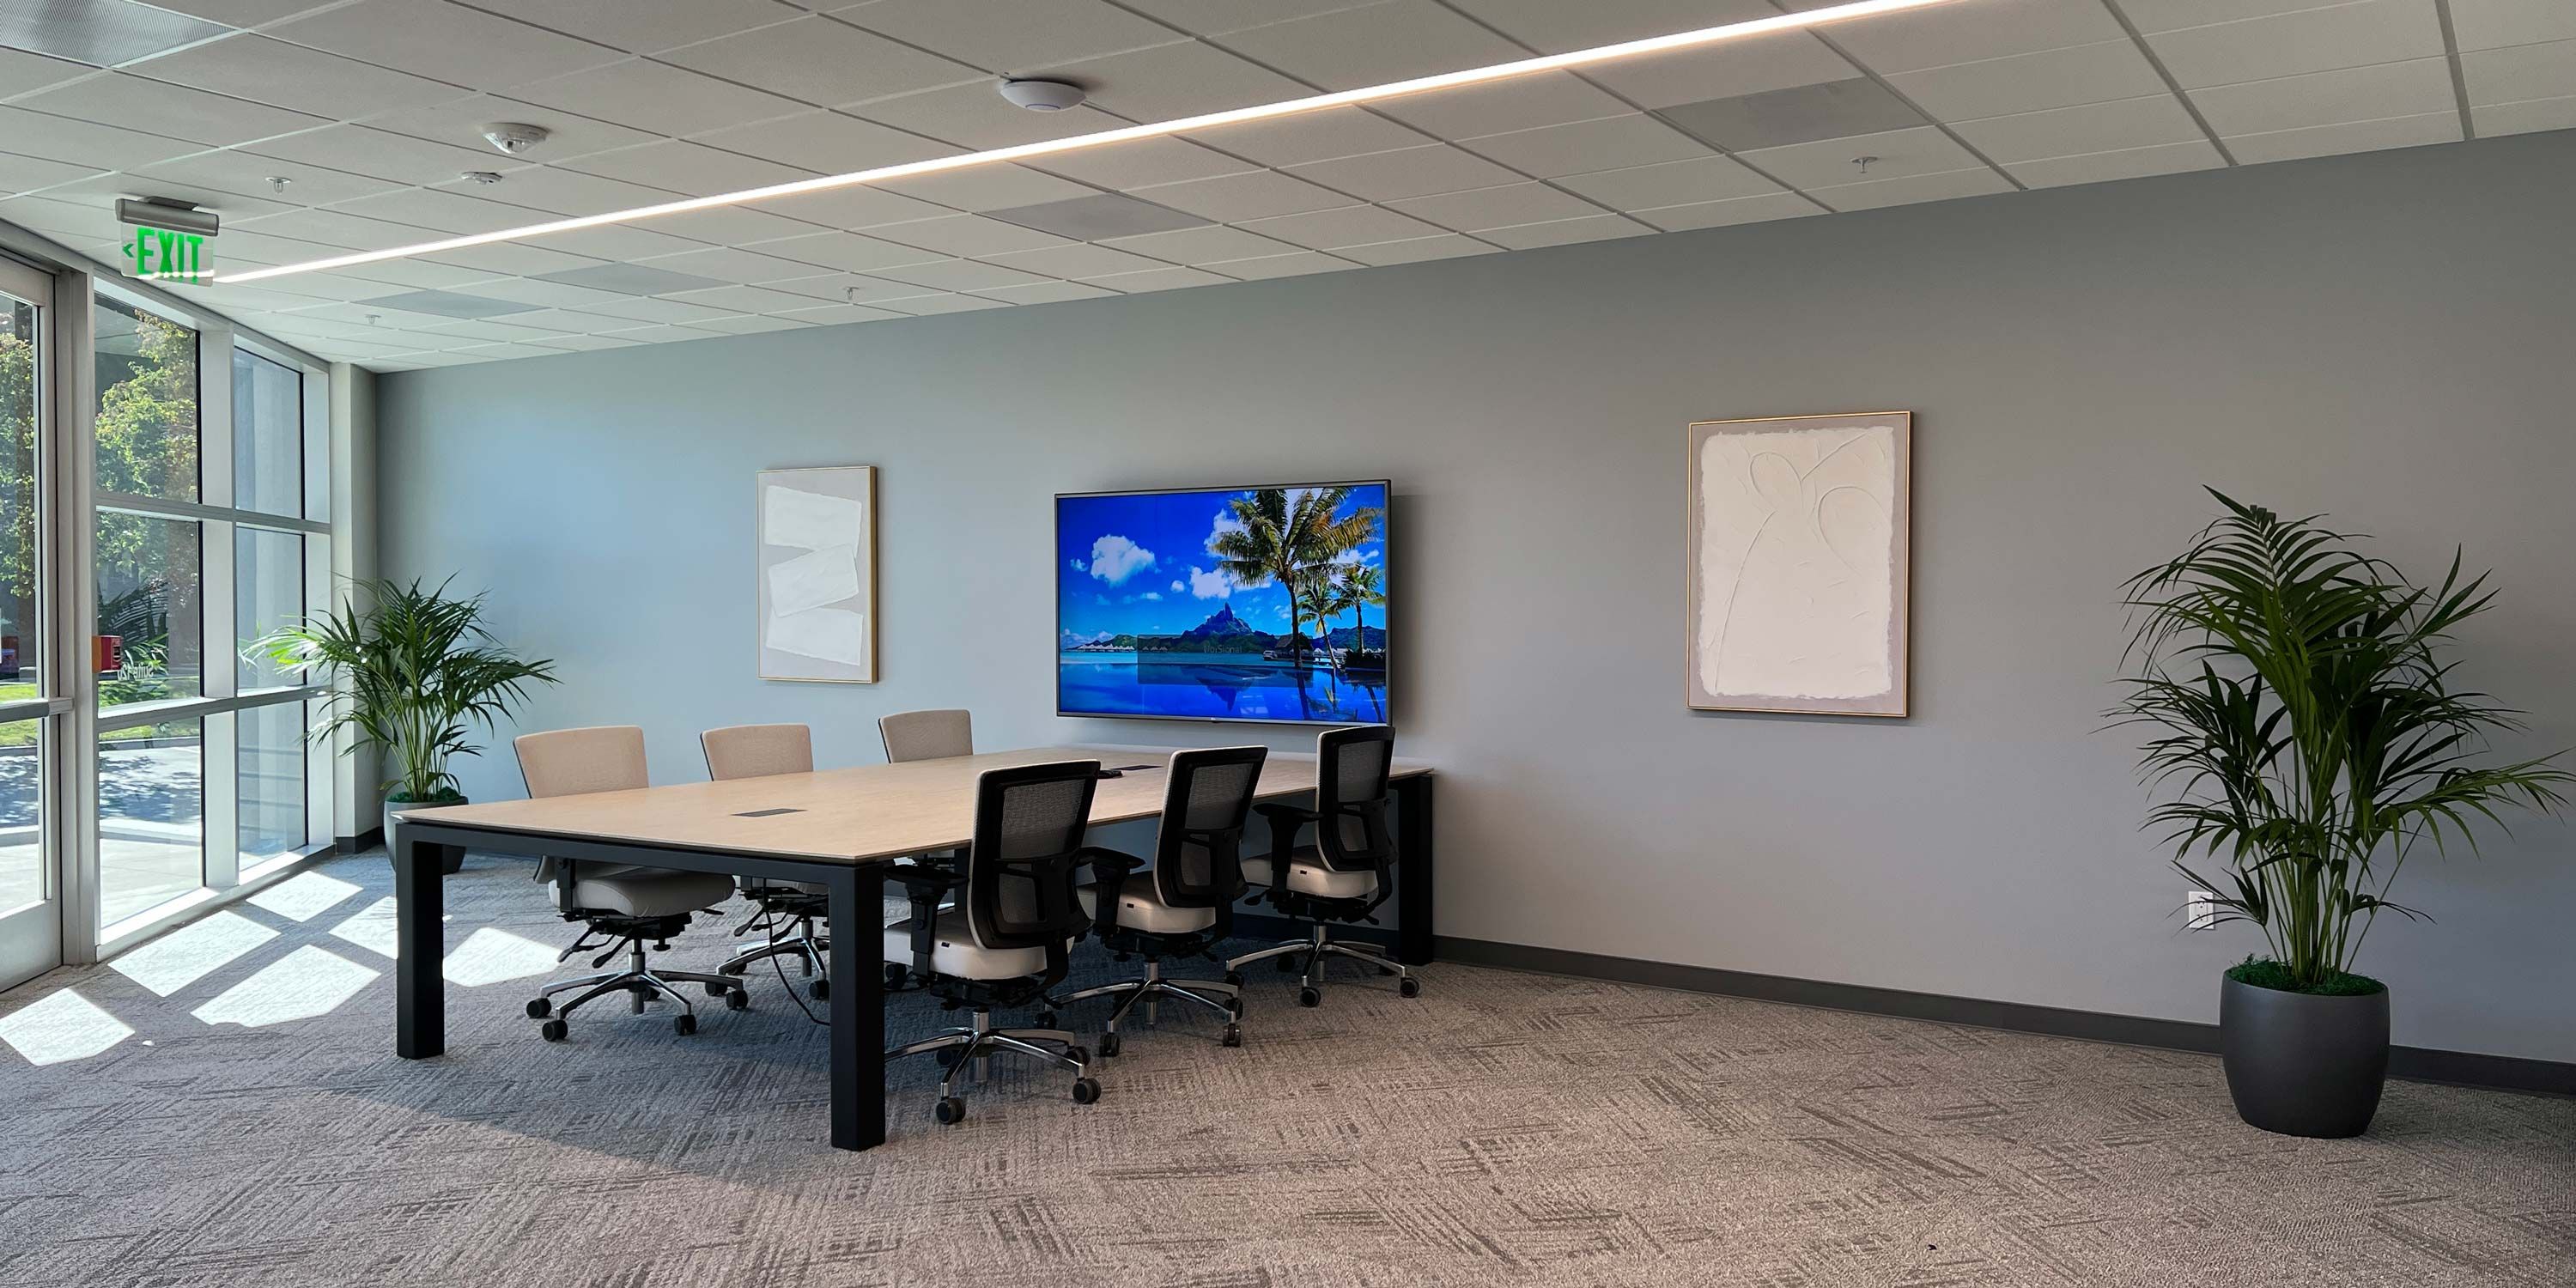 medium sized conference room with LED lighting and Audio/Video